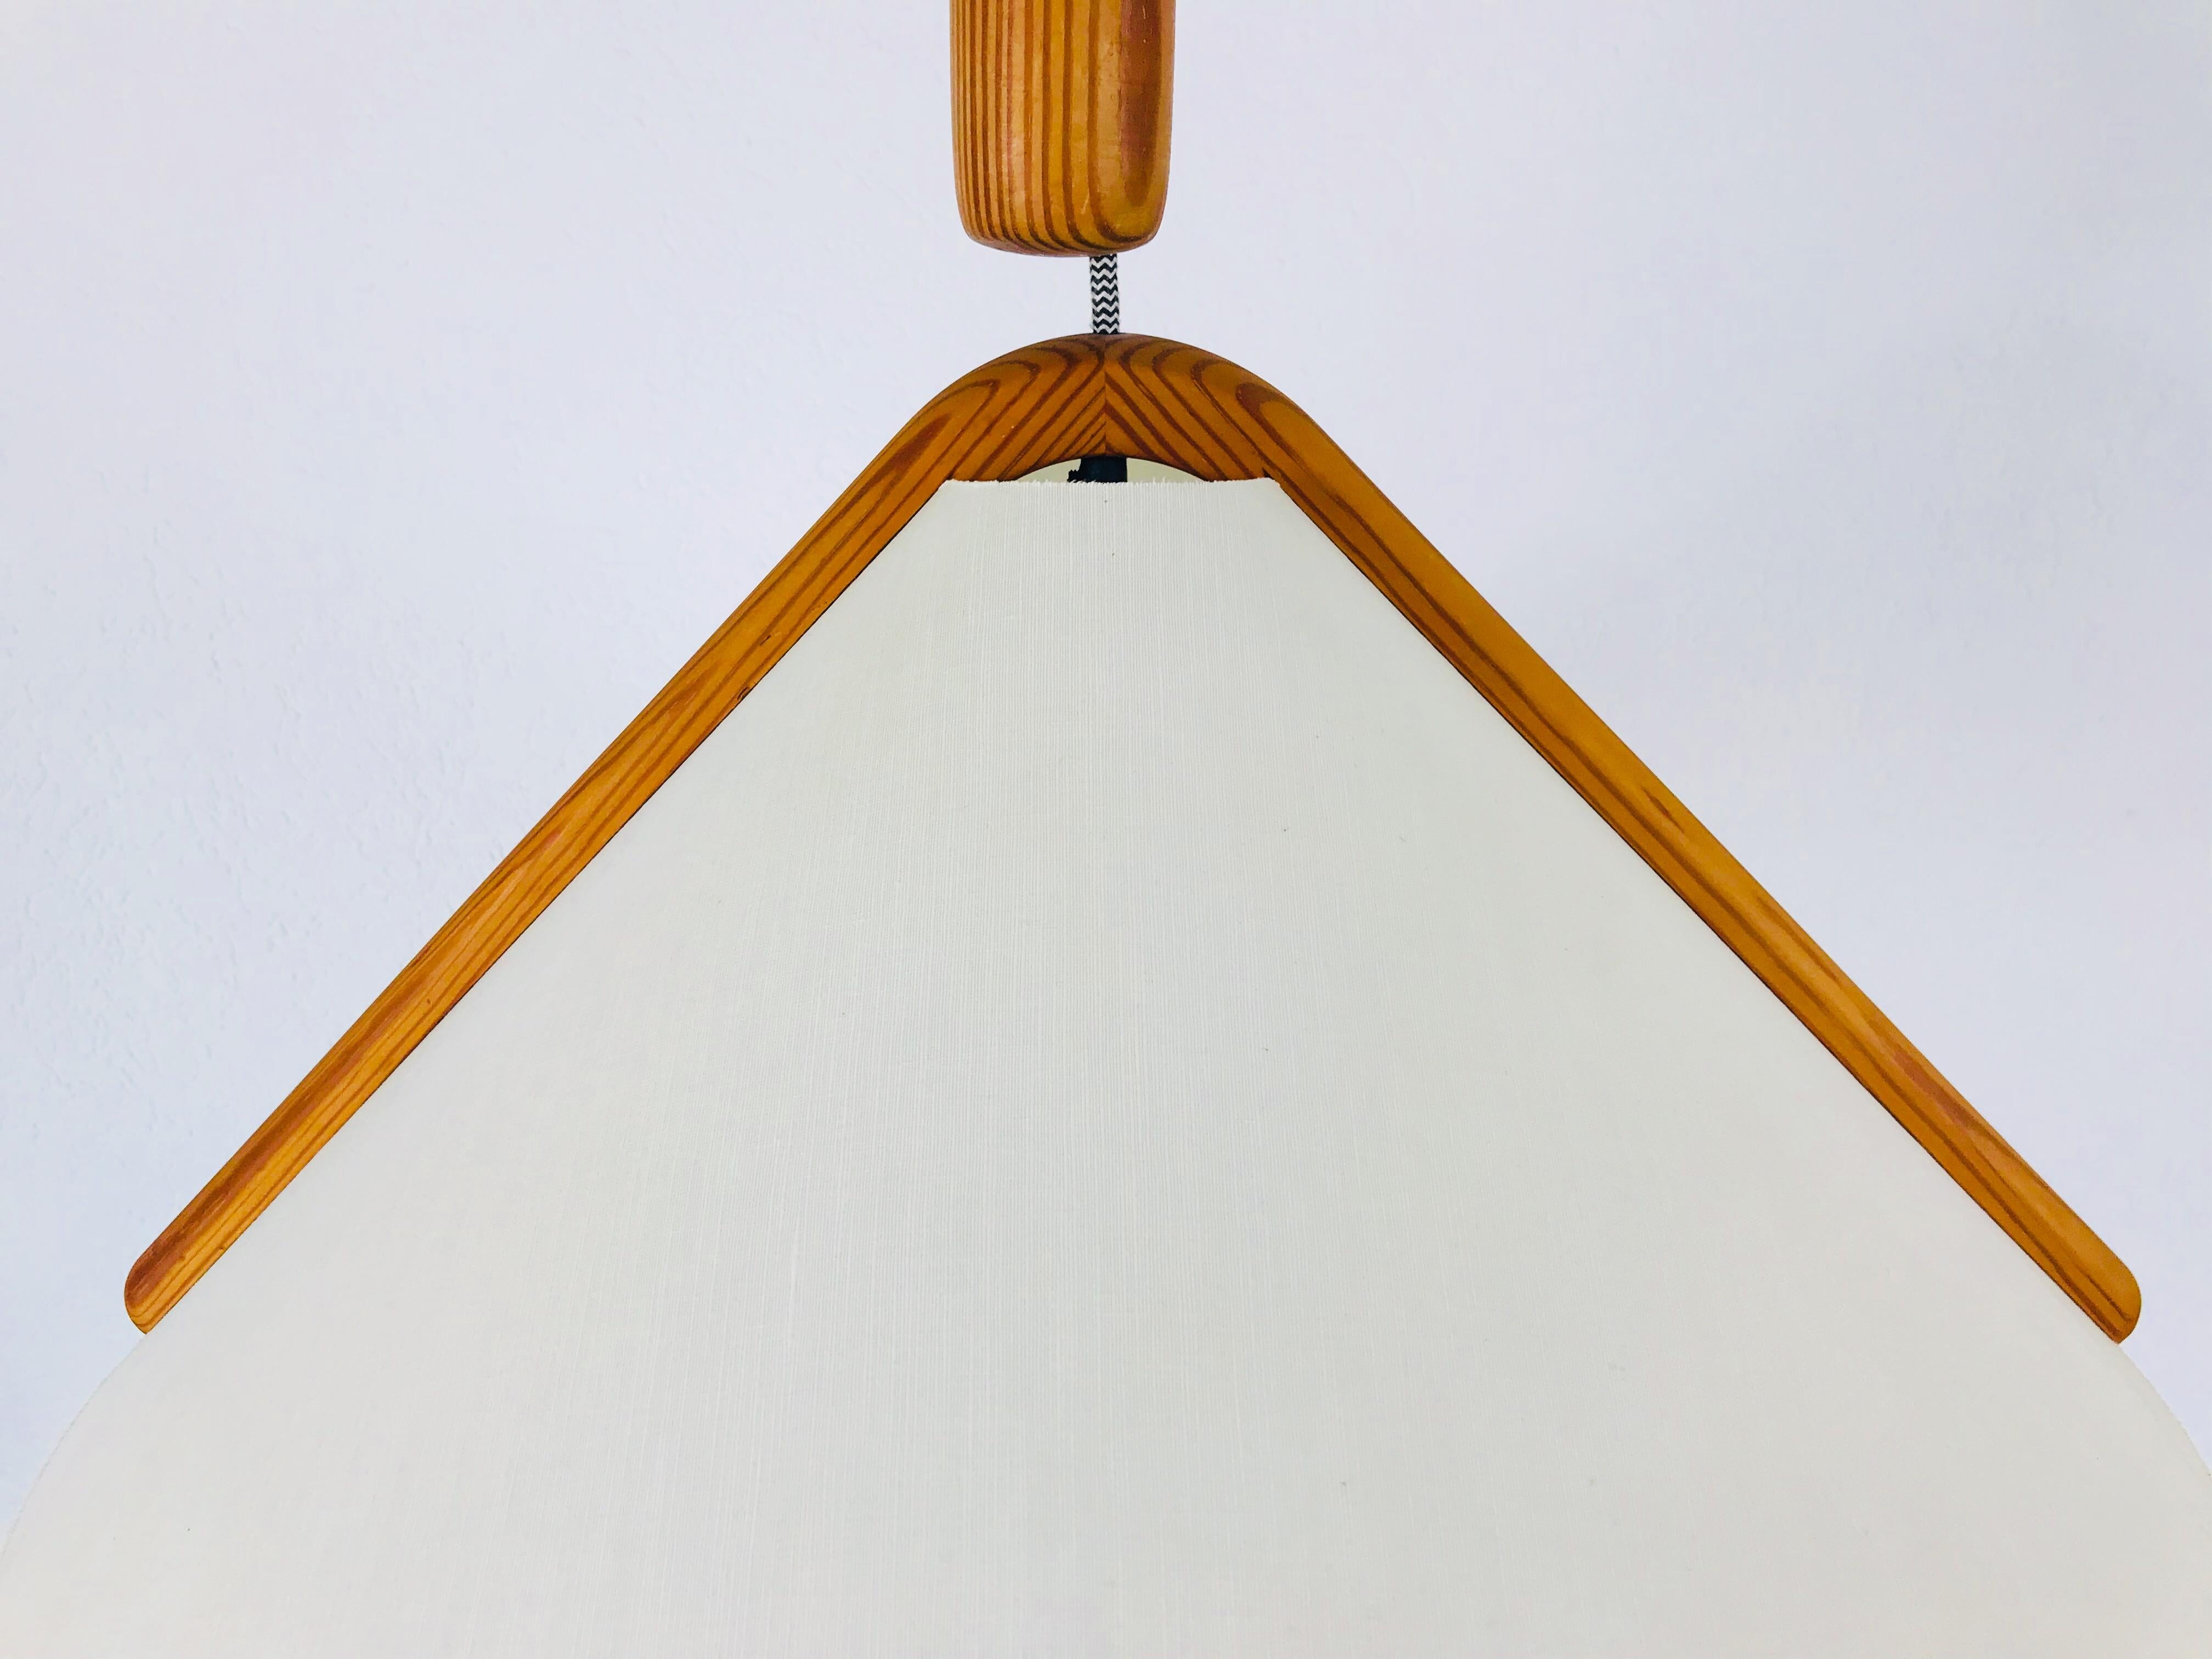 Teak Adjustable Midcentury Wooden Pendant Lamp with Counterweight by Domus, 1960s